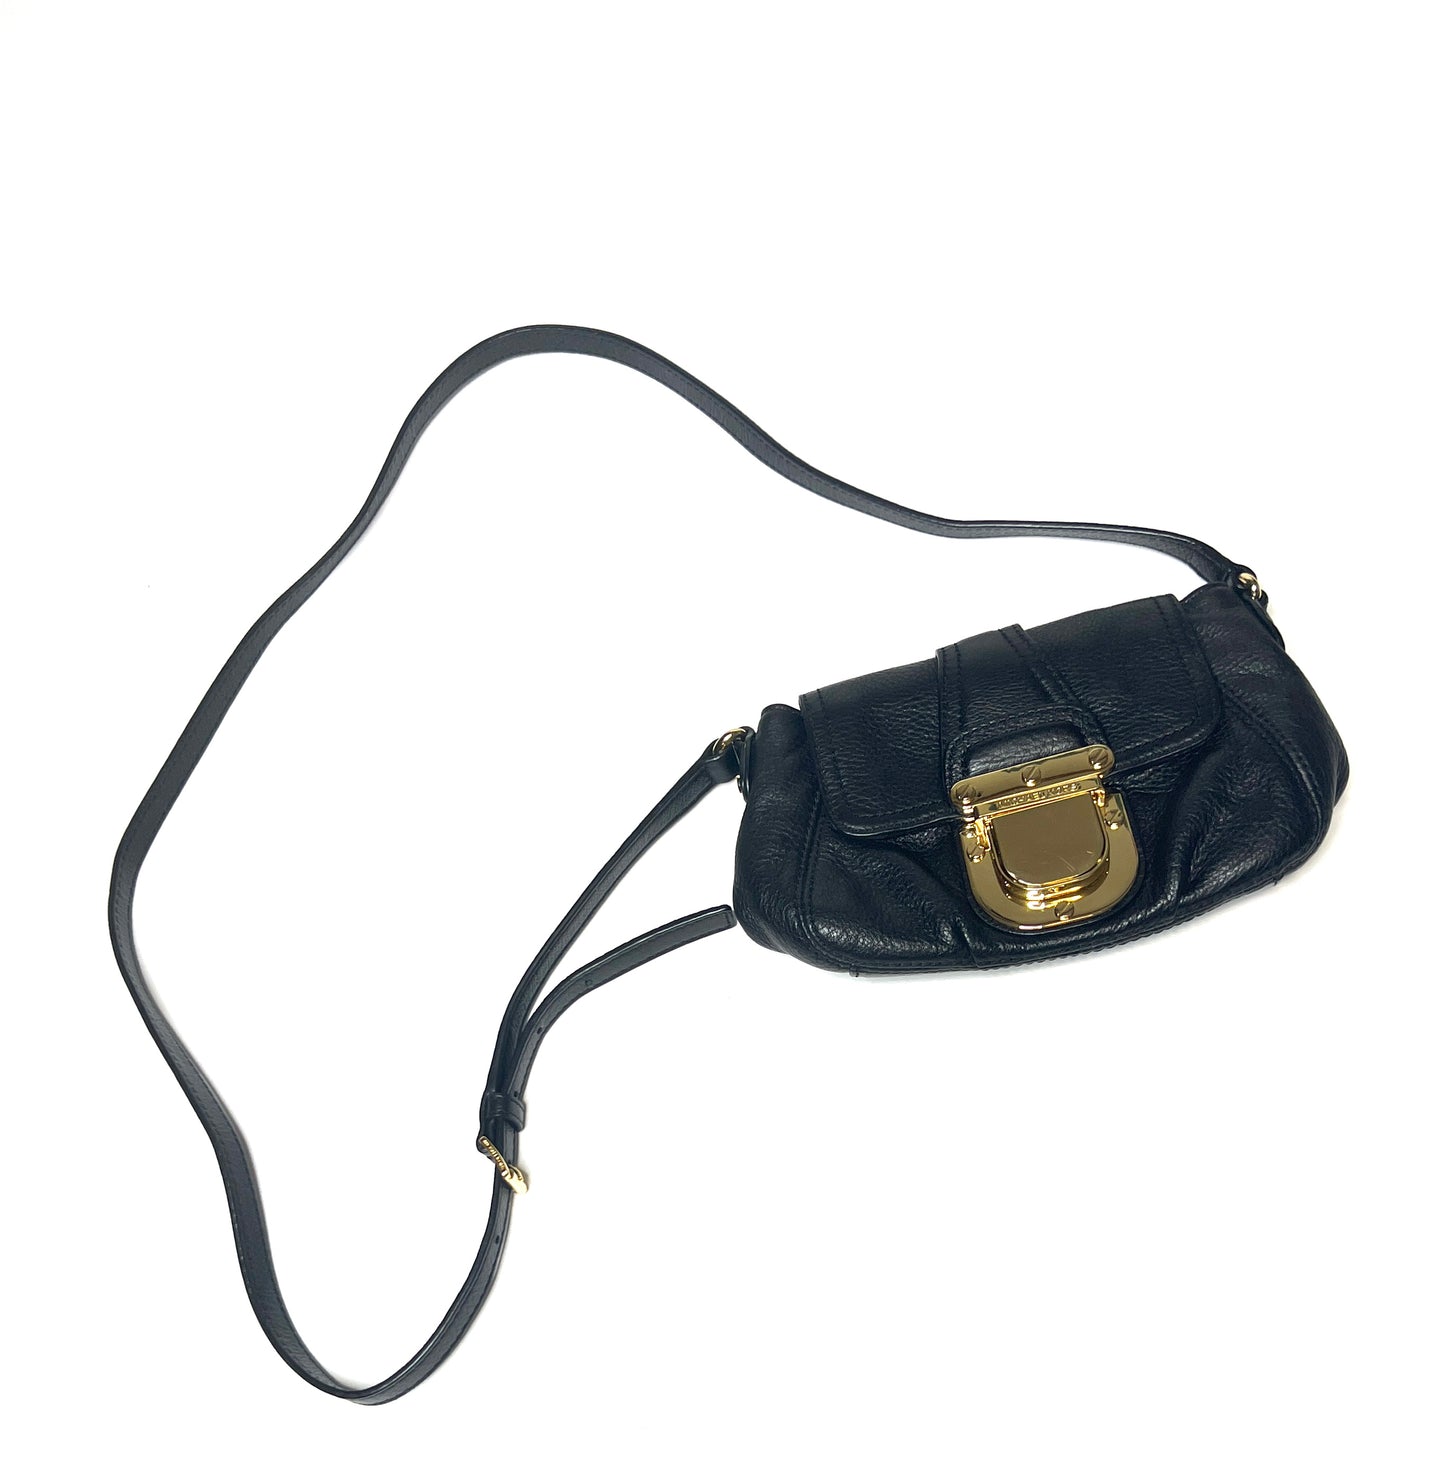 Michale Kors Small Black Purse with Gold Buckle GUC for a few small scratches on buckle